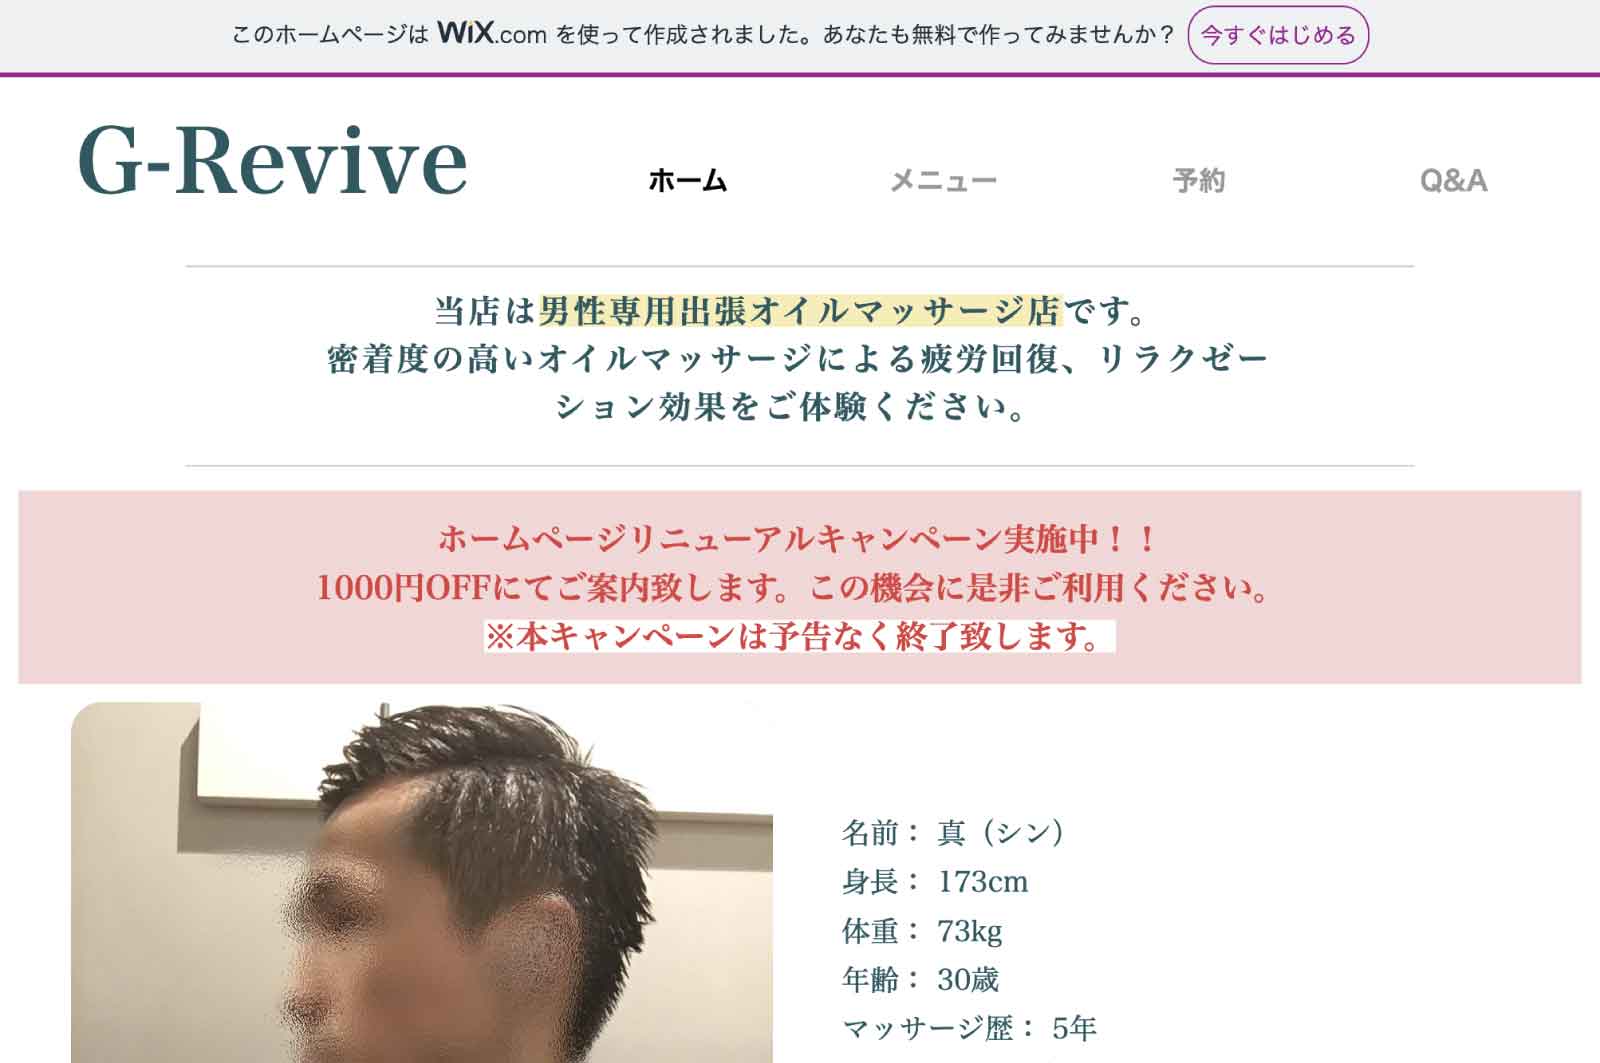 G-Revive